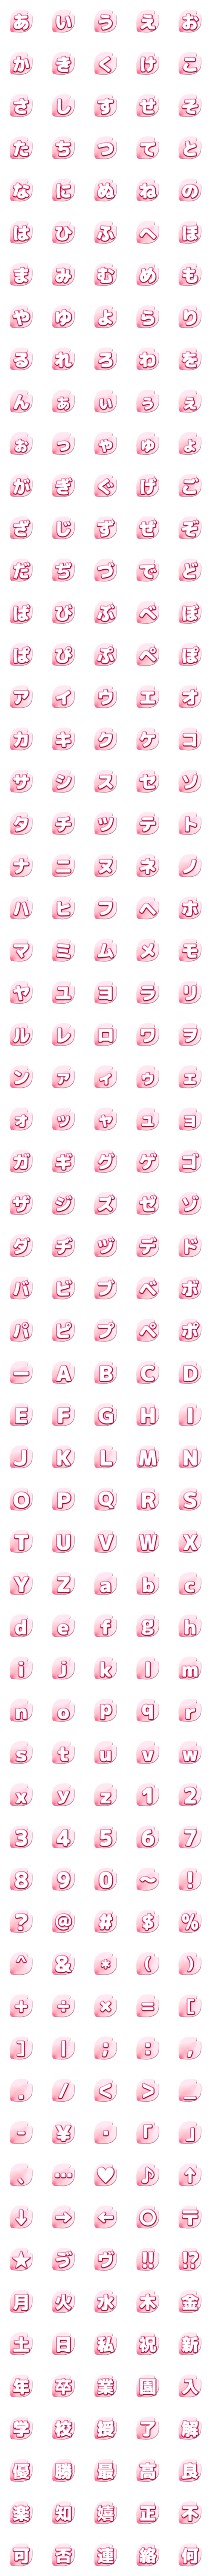 [LINE絵文字]～春を感じる～桜の花びらデコ文字 丸ゴシの画像一覧